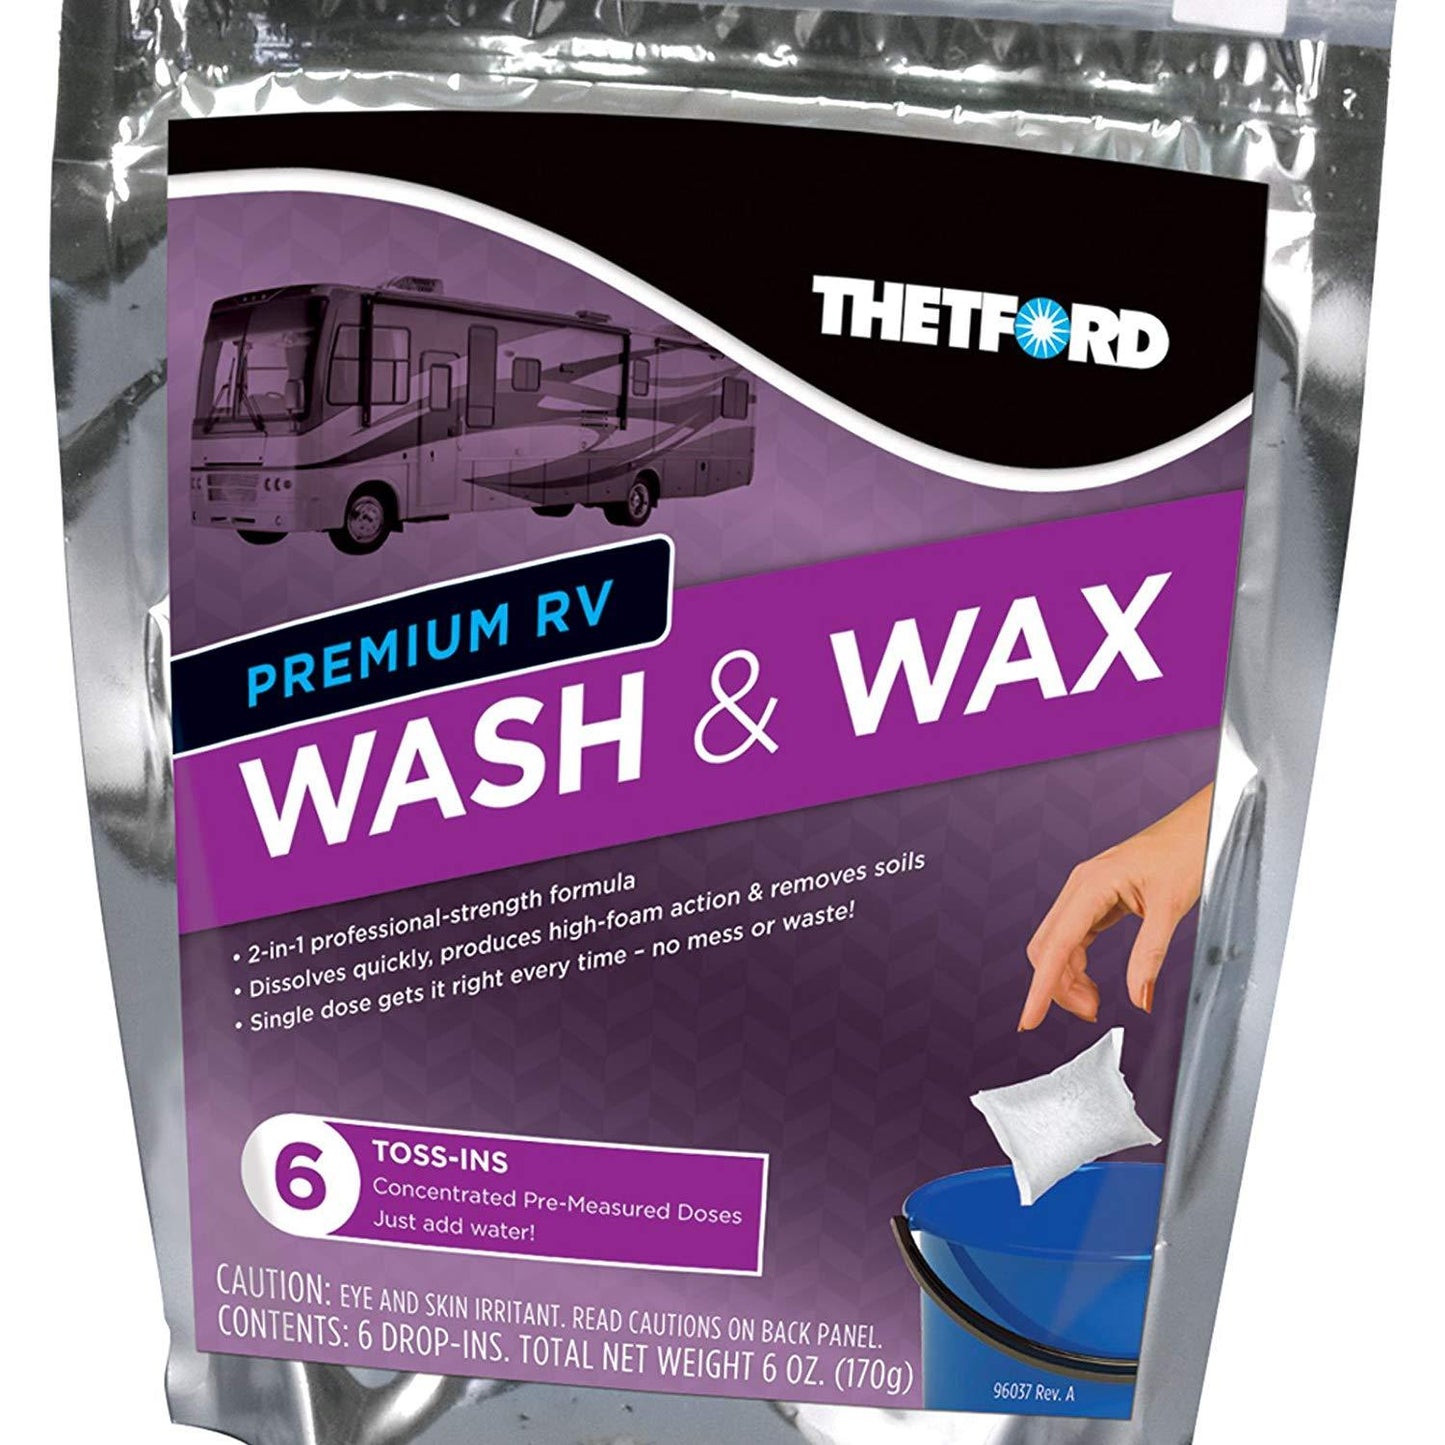 Thetford 96008 Premium Wash & Wax Toss-Ins-Detergent and Wax for Cars, RVs, Boats, Trucks-6x1 oz packets-Thetford-96008